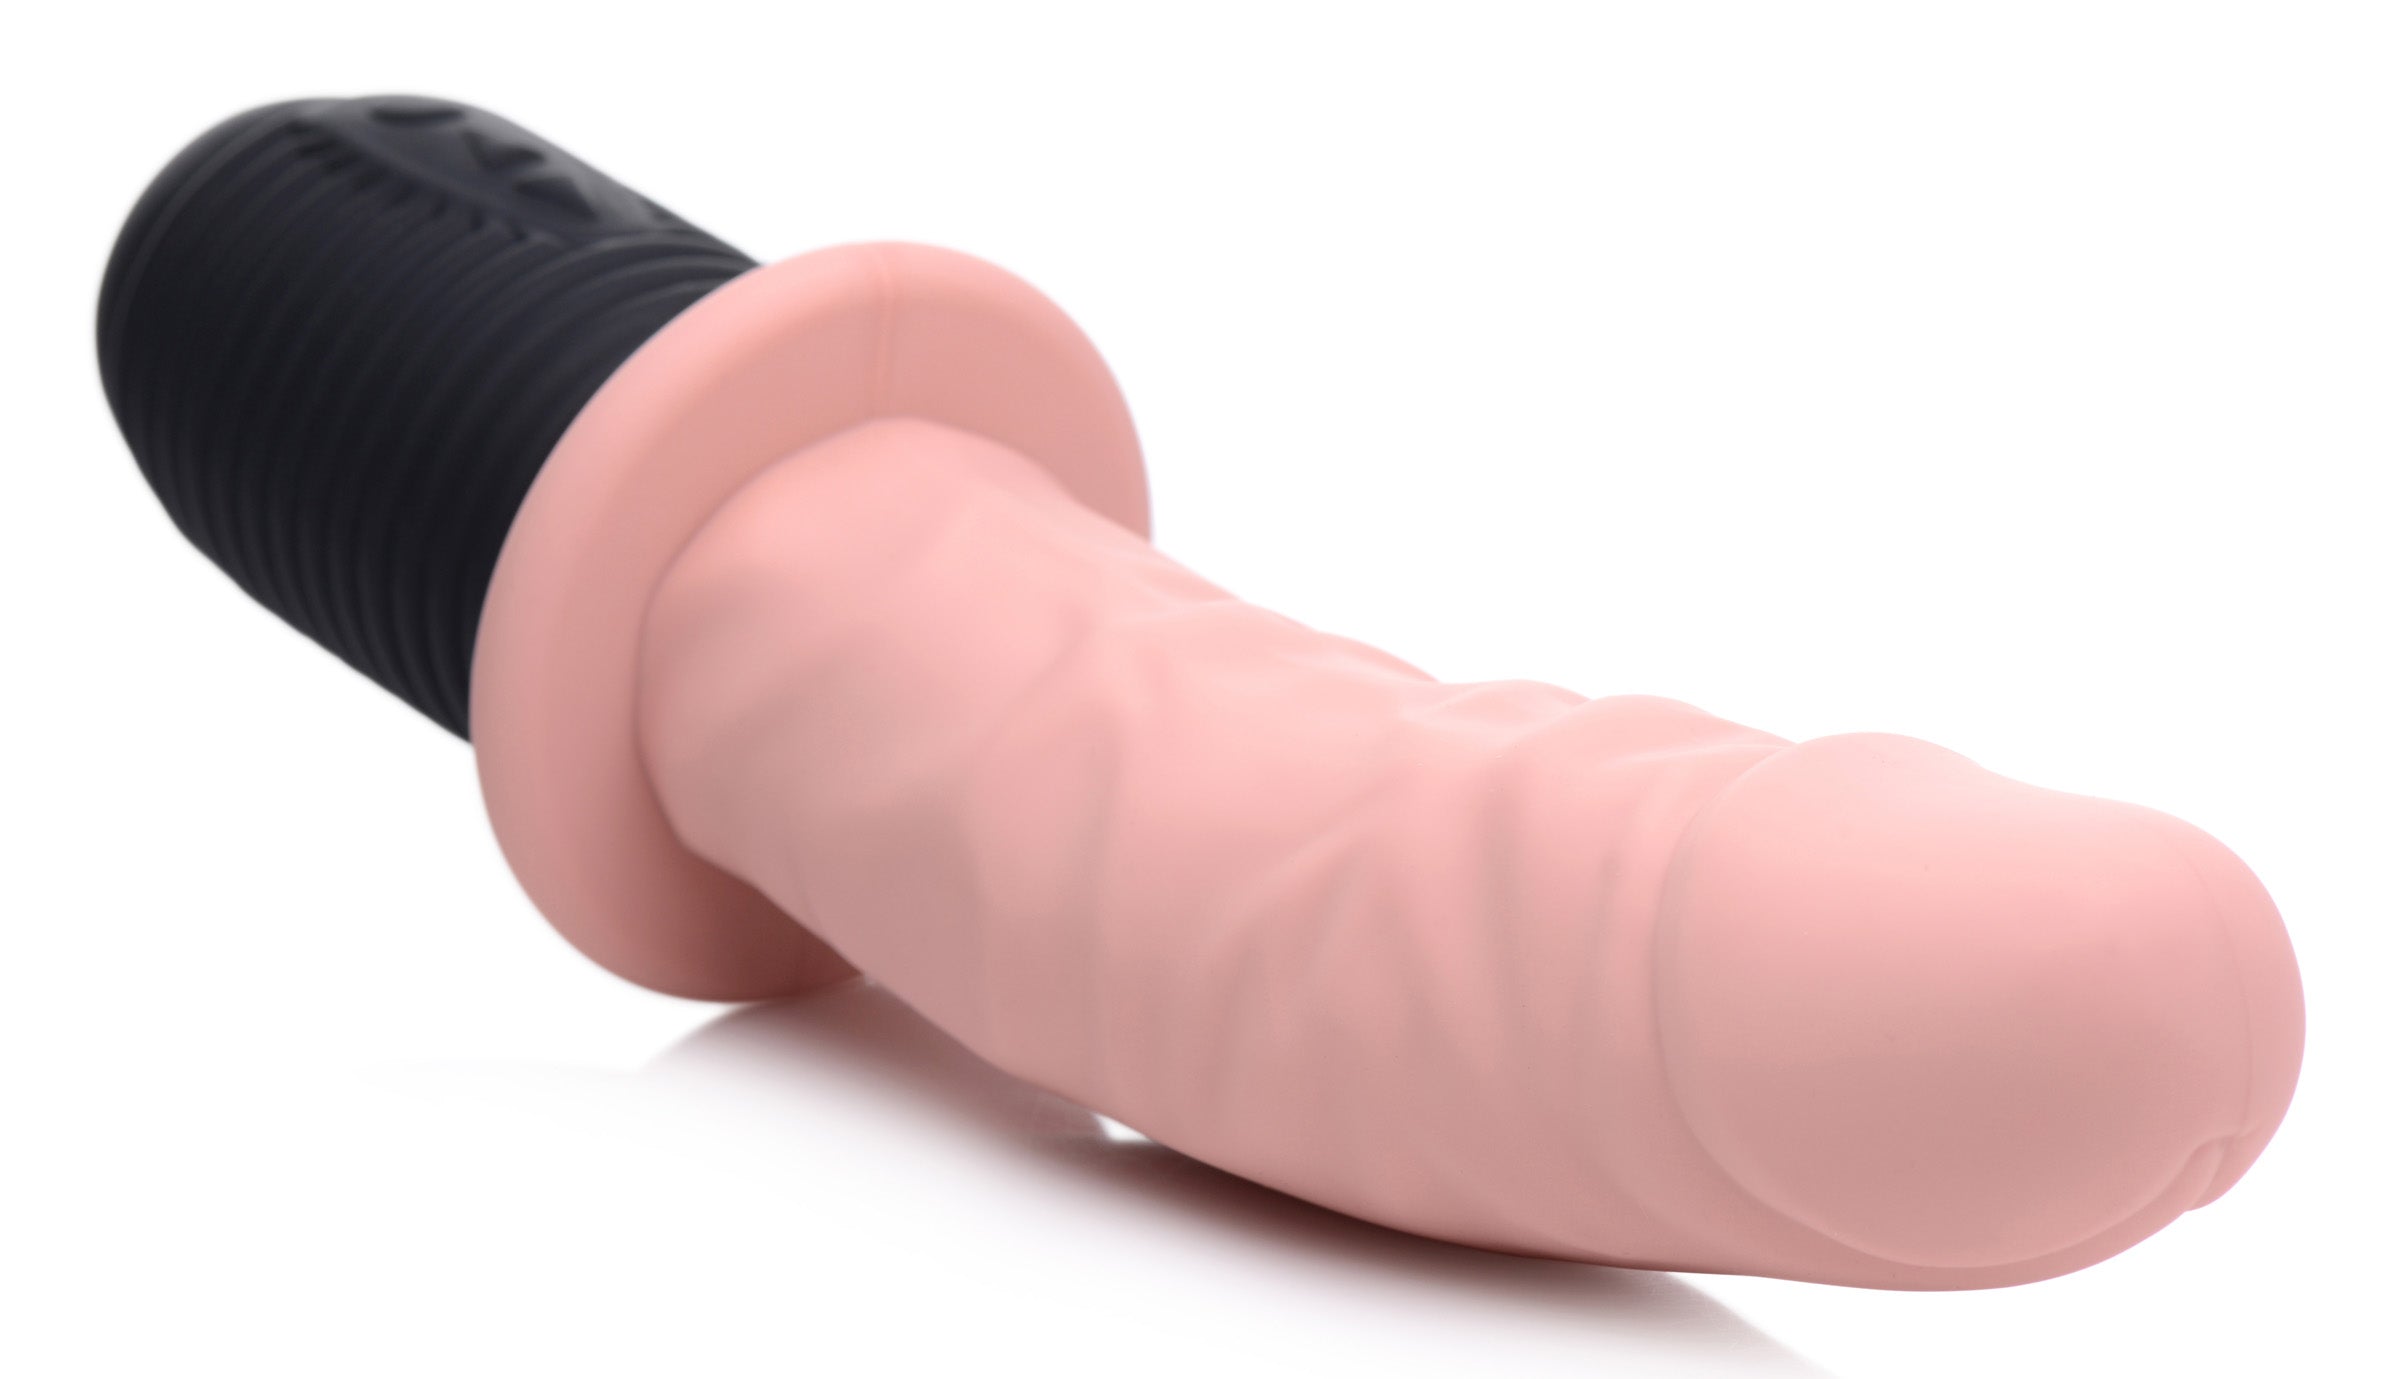 Power Pounder Vibrating and Thrusting Silicone Dildo - Light